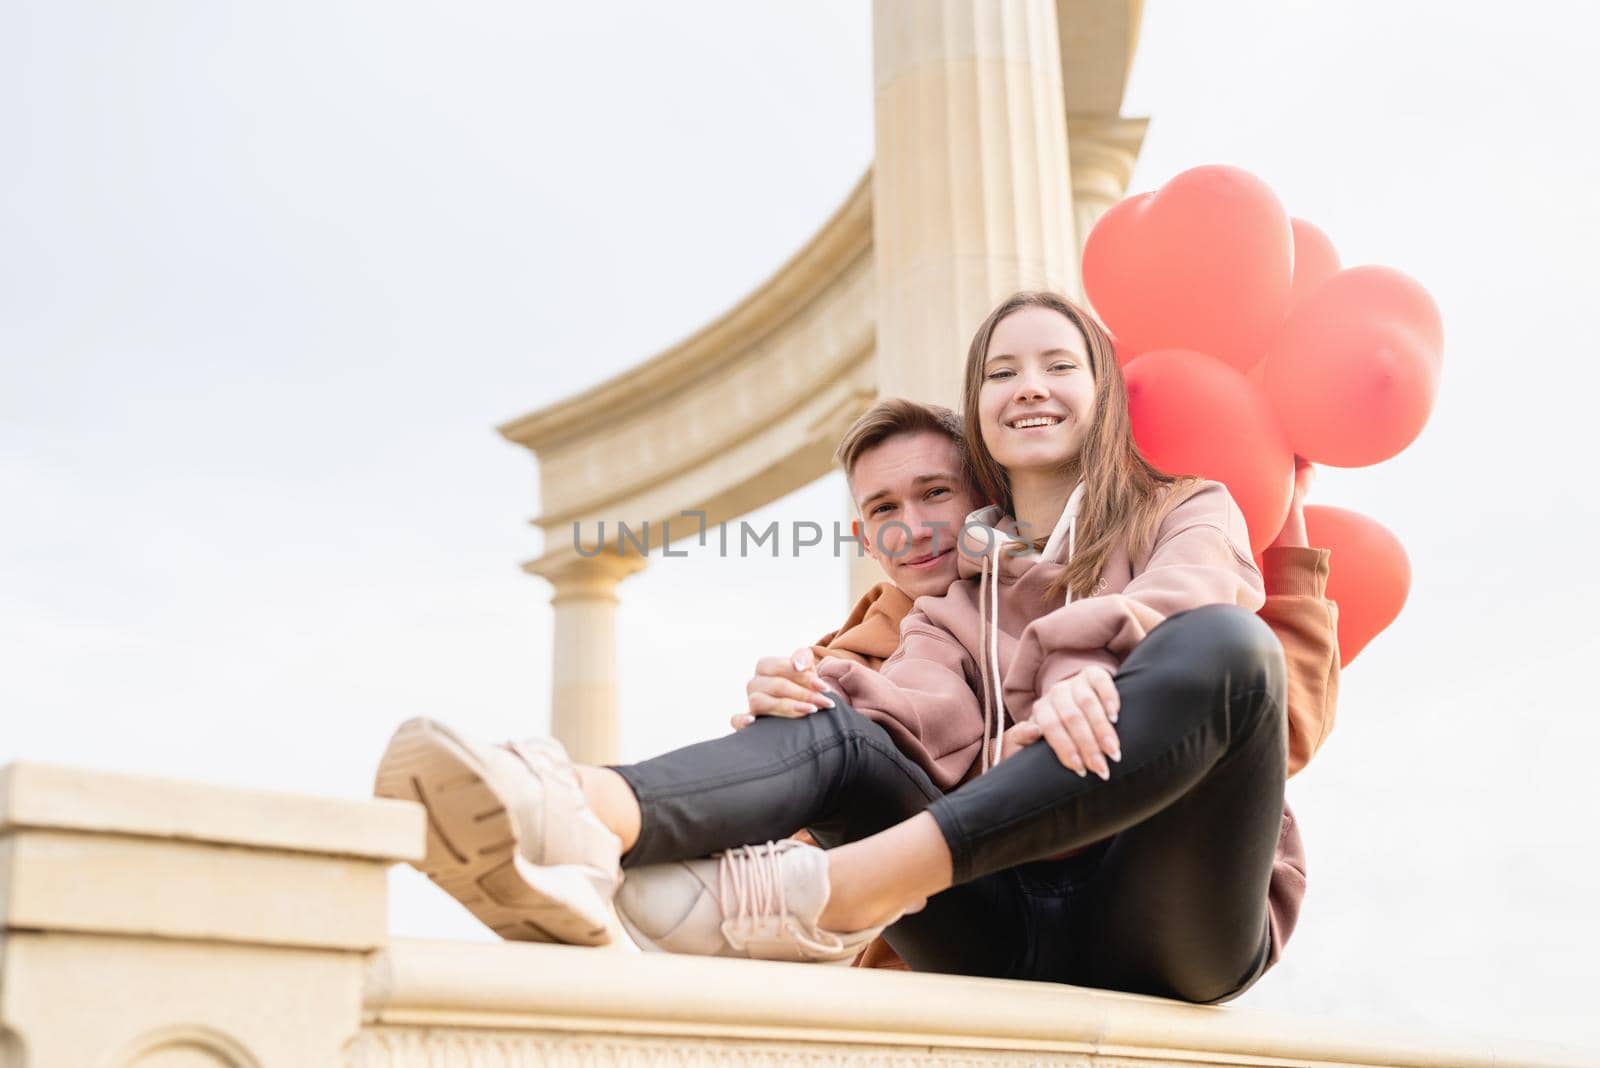 Young loving couple embracing each other outdoors in the park holding balloons by Desperada